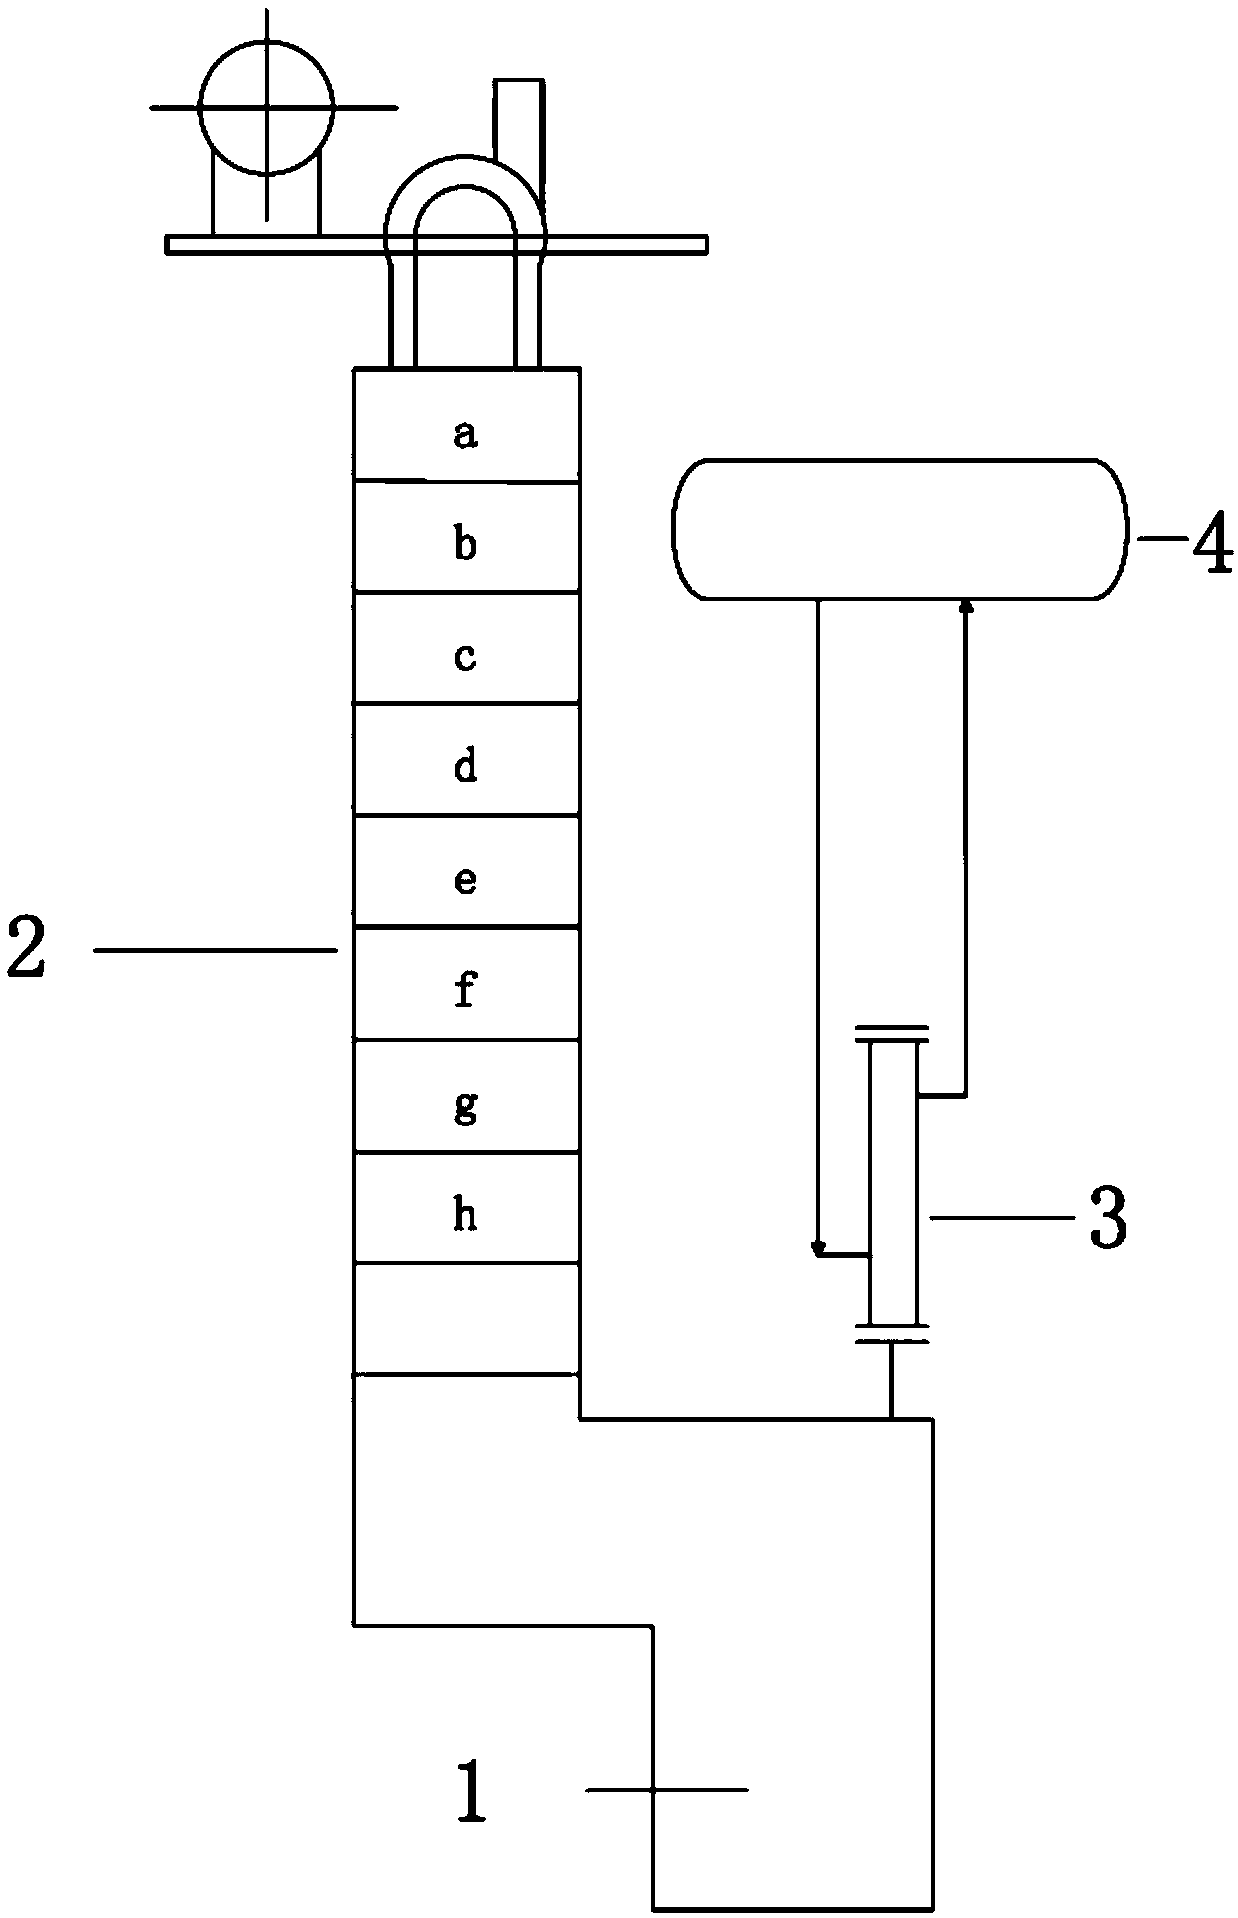 Heat exchange process and heat exchange system for ethylene cracking furnace